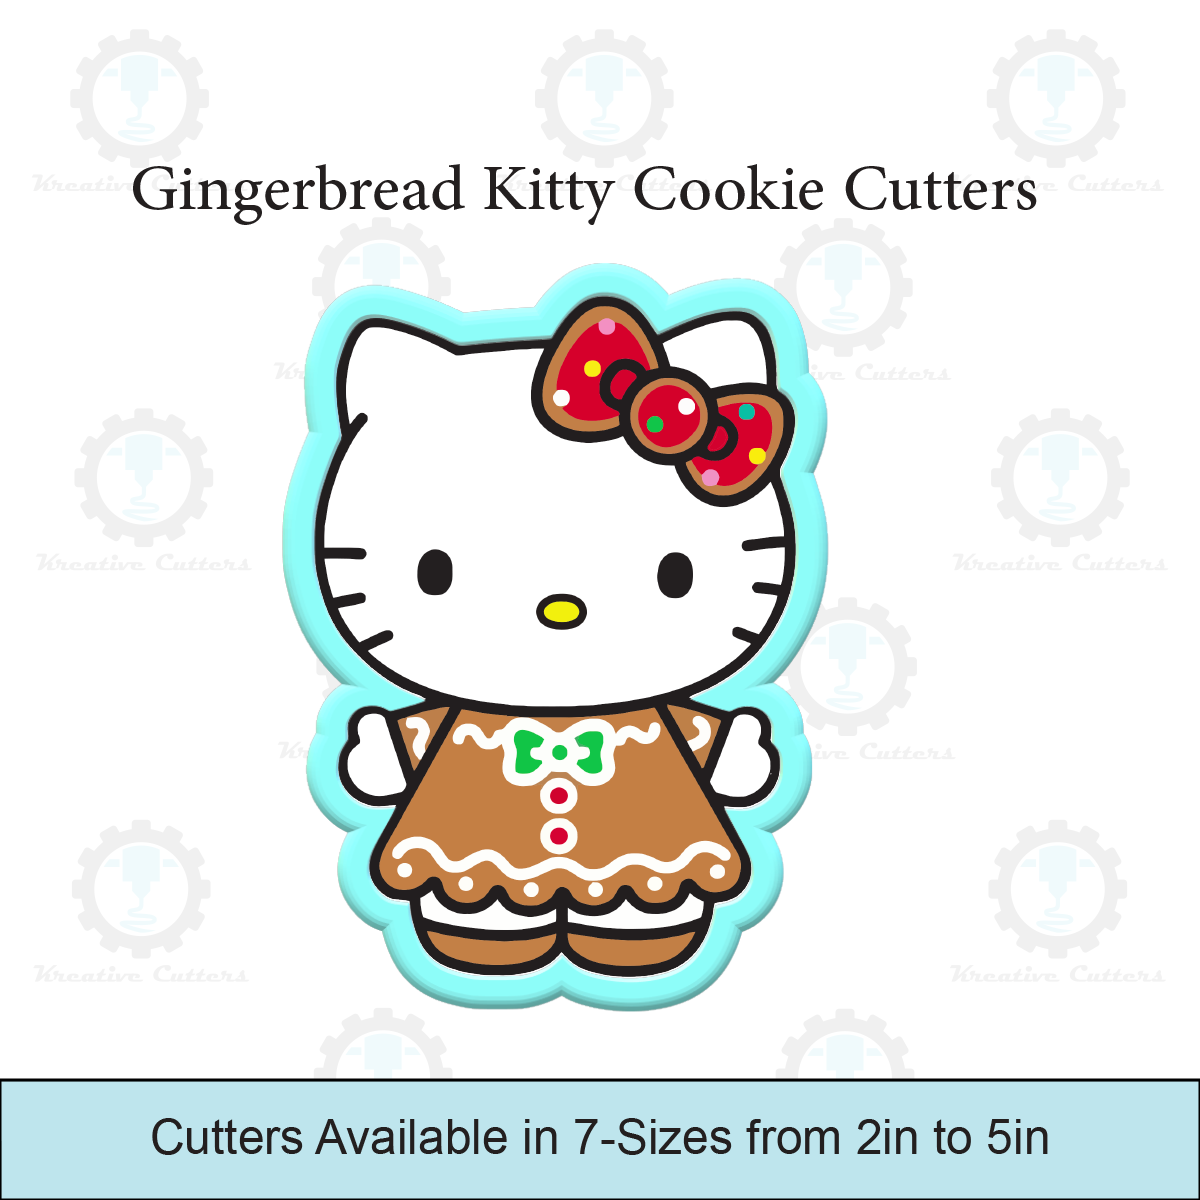 Gingerbread Kitty Cookie Cutters